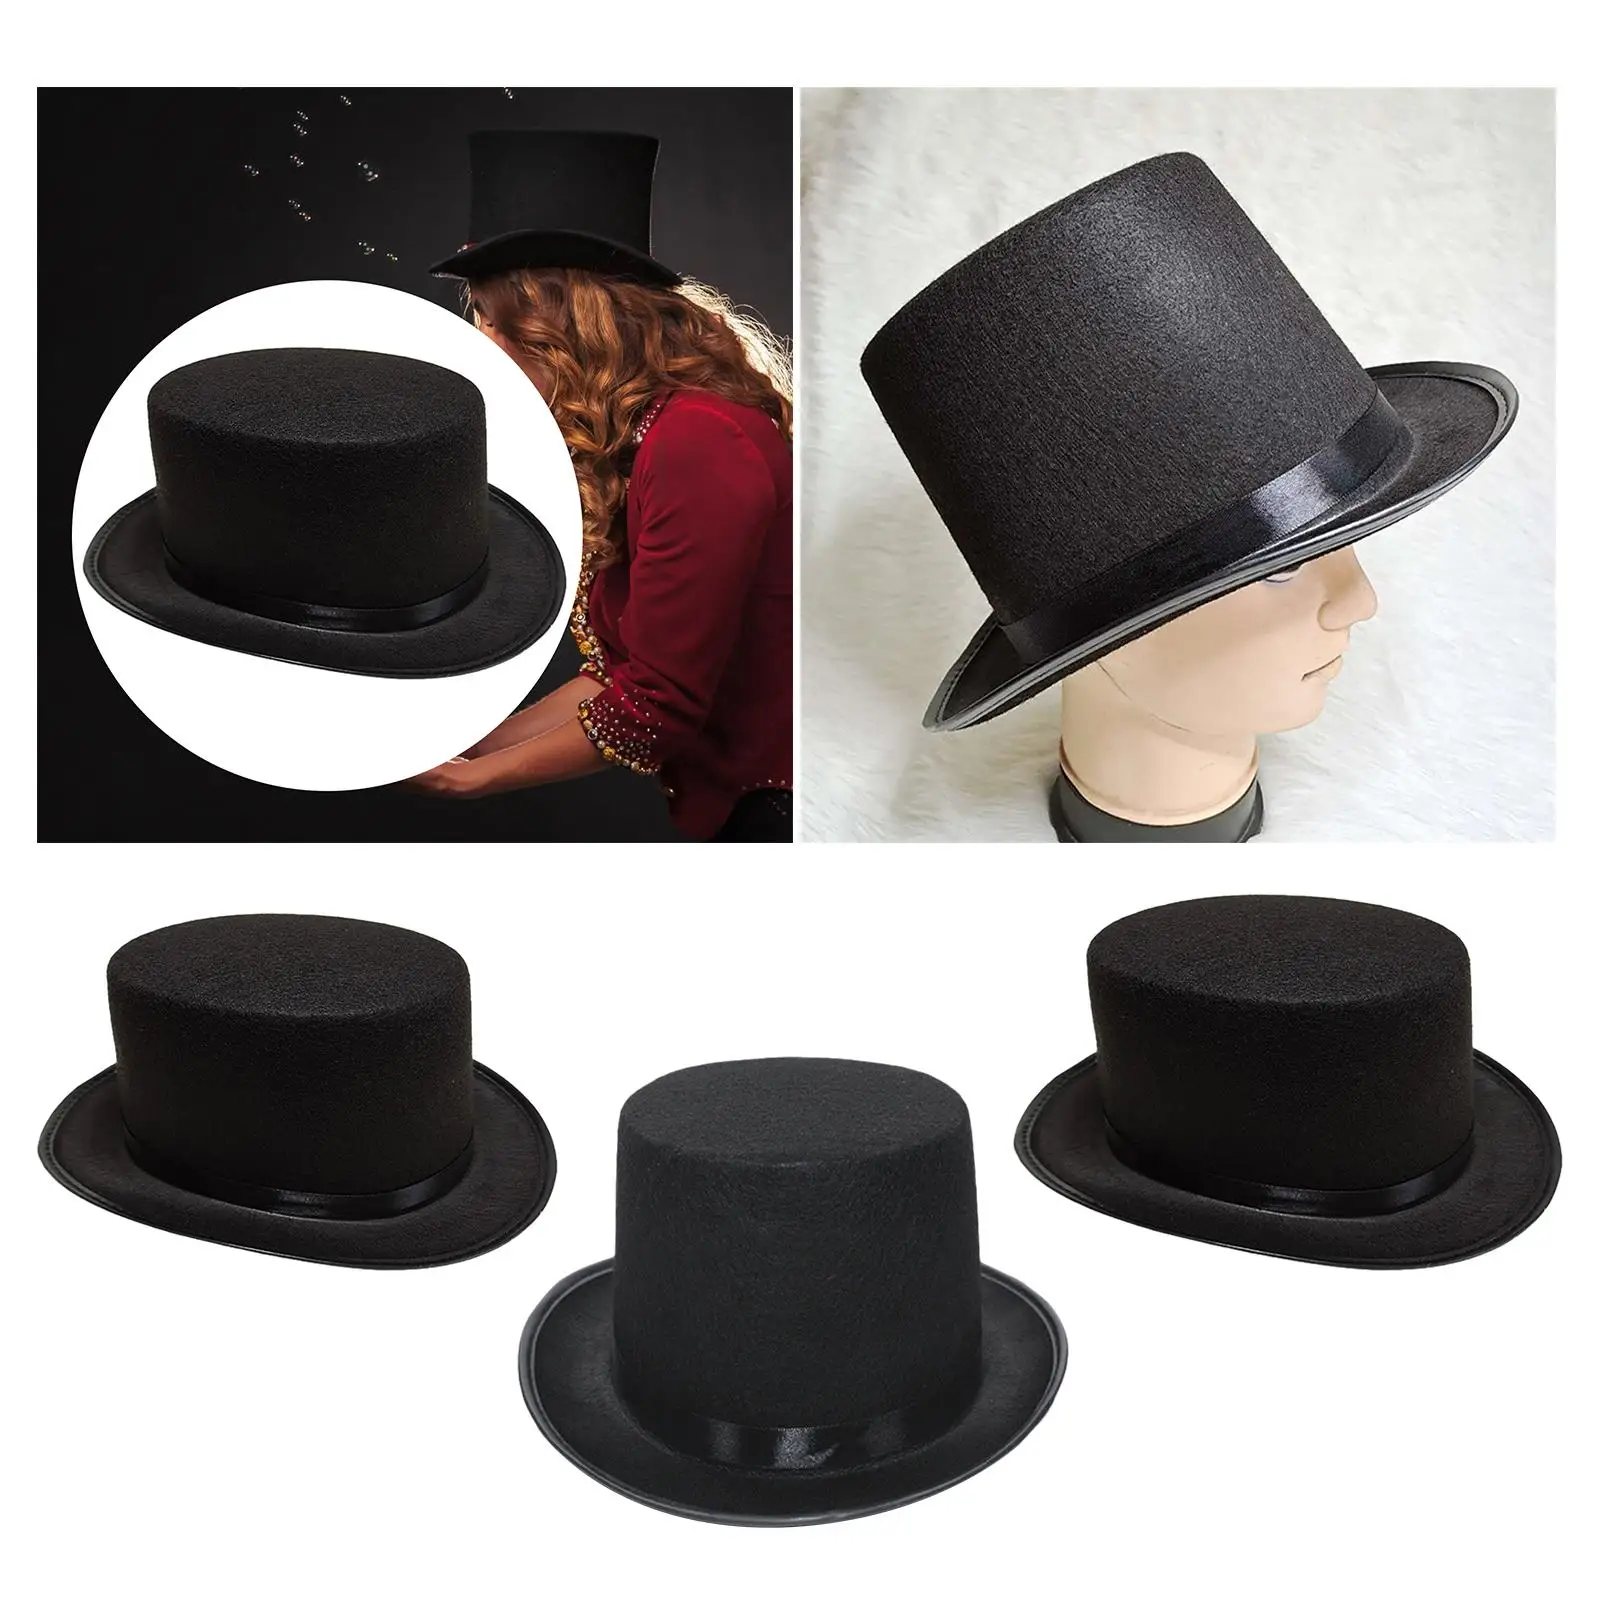 Black Top Hat Party Hats Adults Magician Butler Flat Top Jazz Hat Formal Costume Hats Fedoras for Festival Cosplay Nightclub